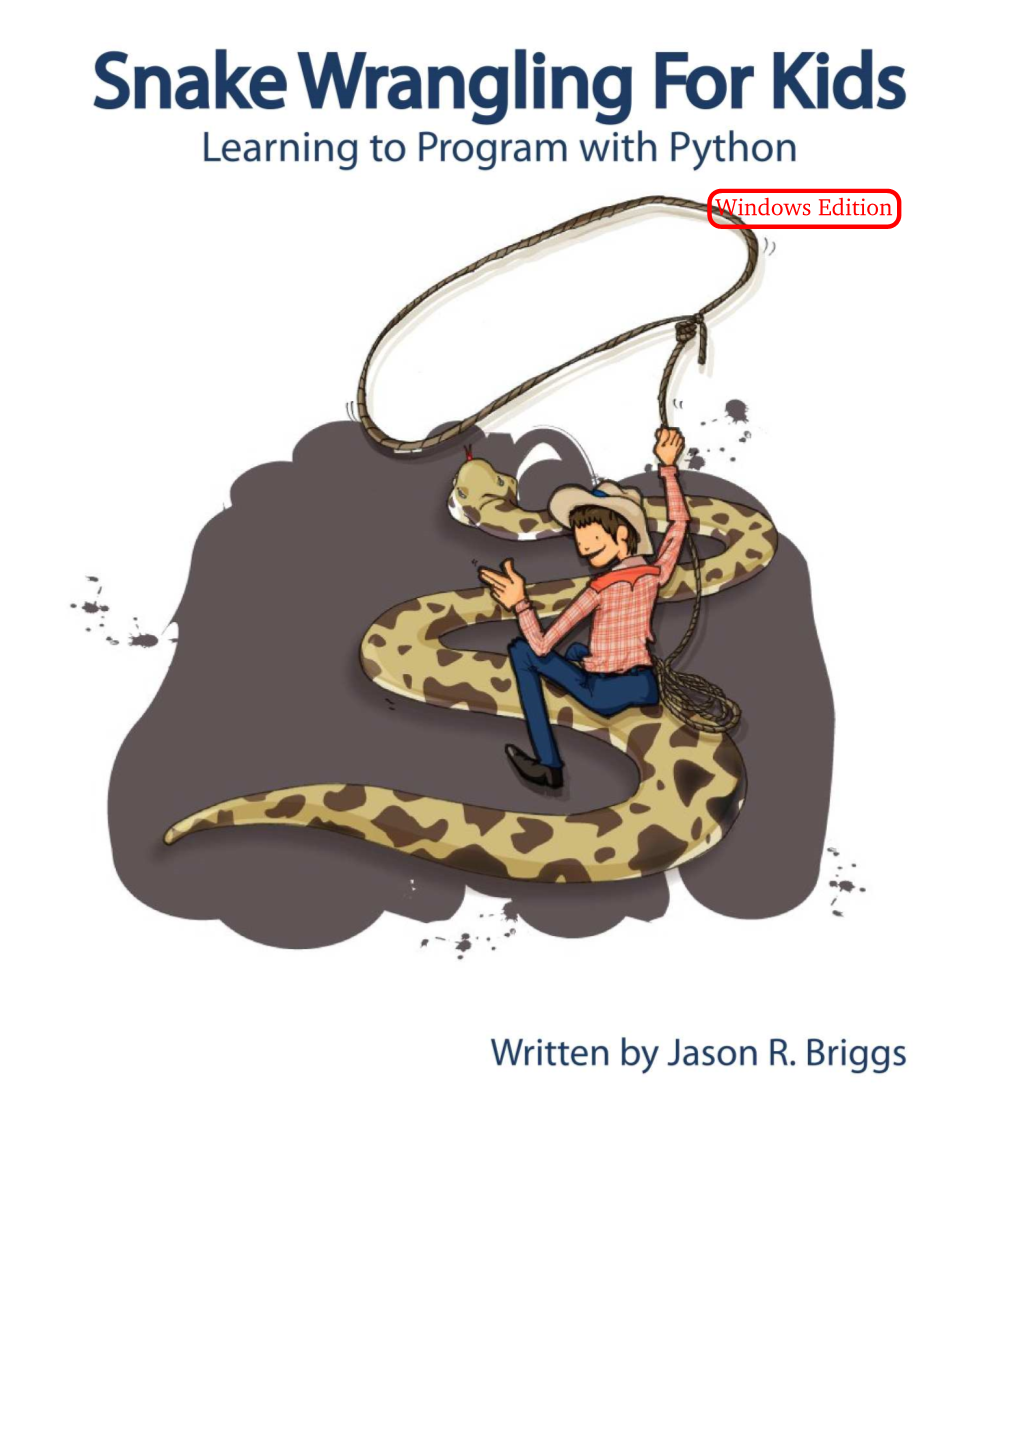 Snake Wrangling for Kids, Learning to Program with Python by Jason R